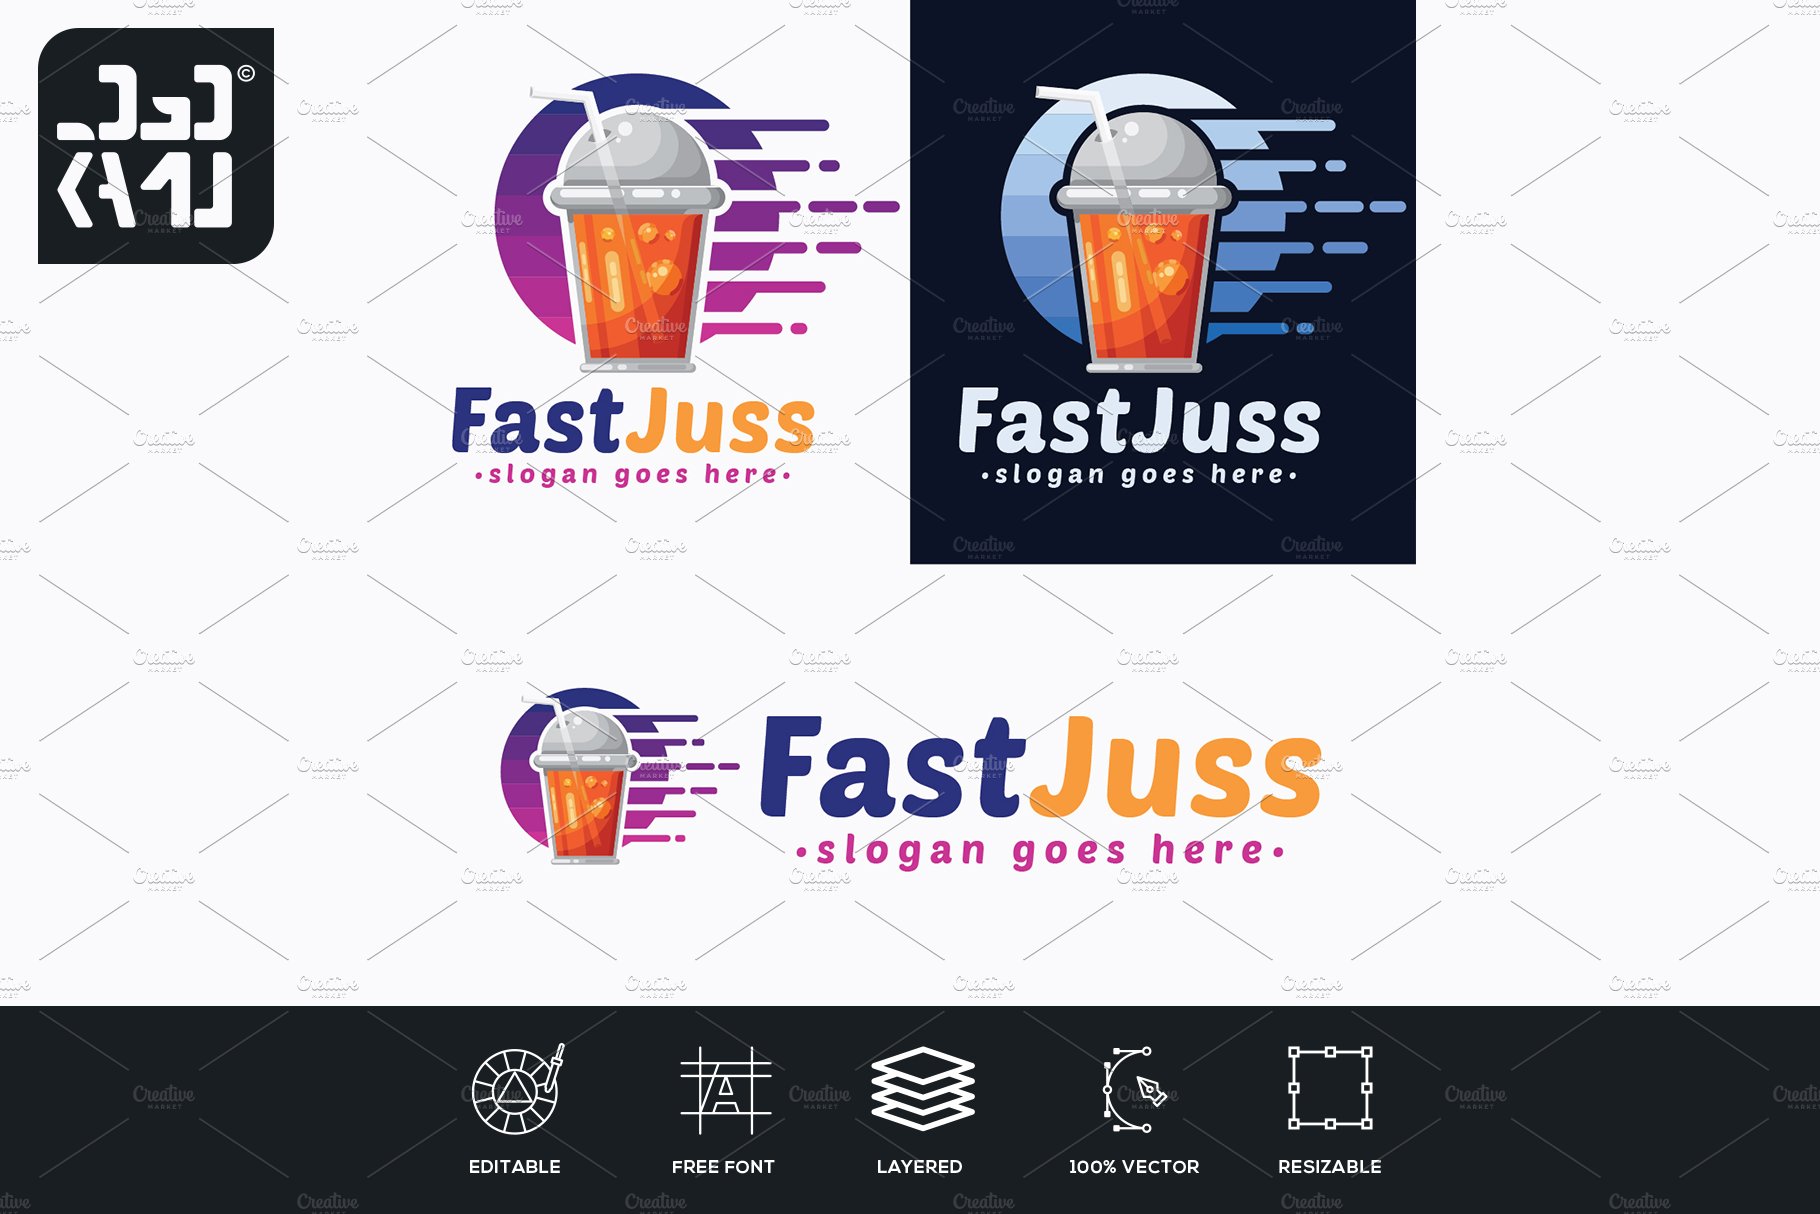 Fast Juice Logo cover image.